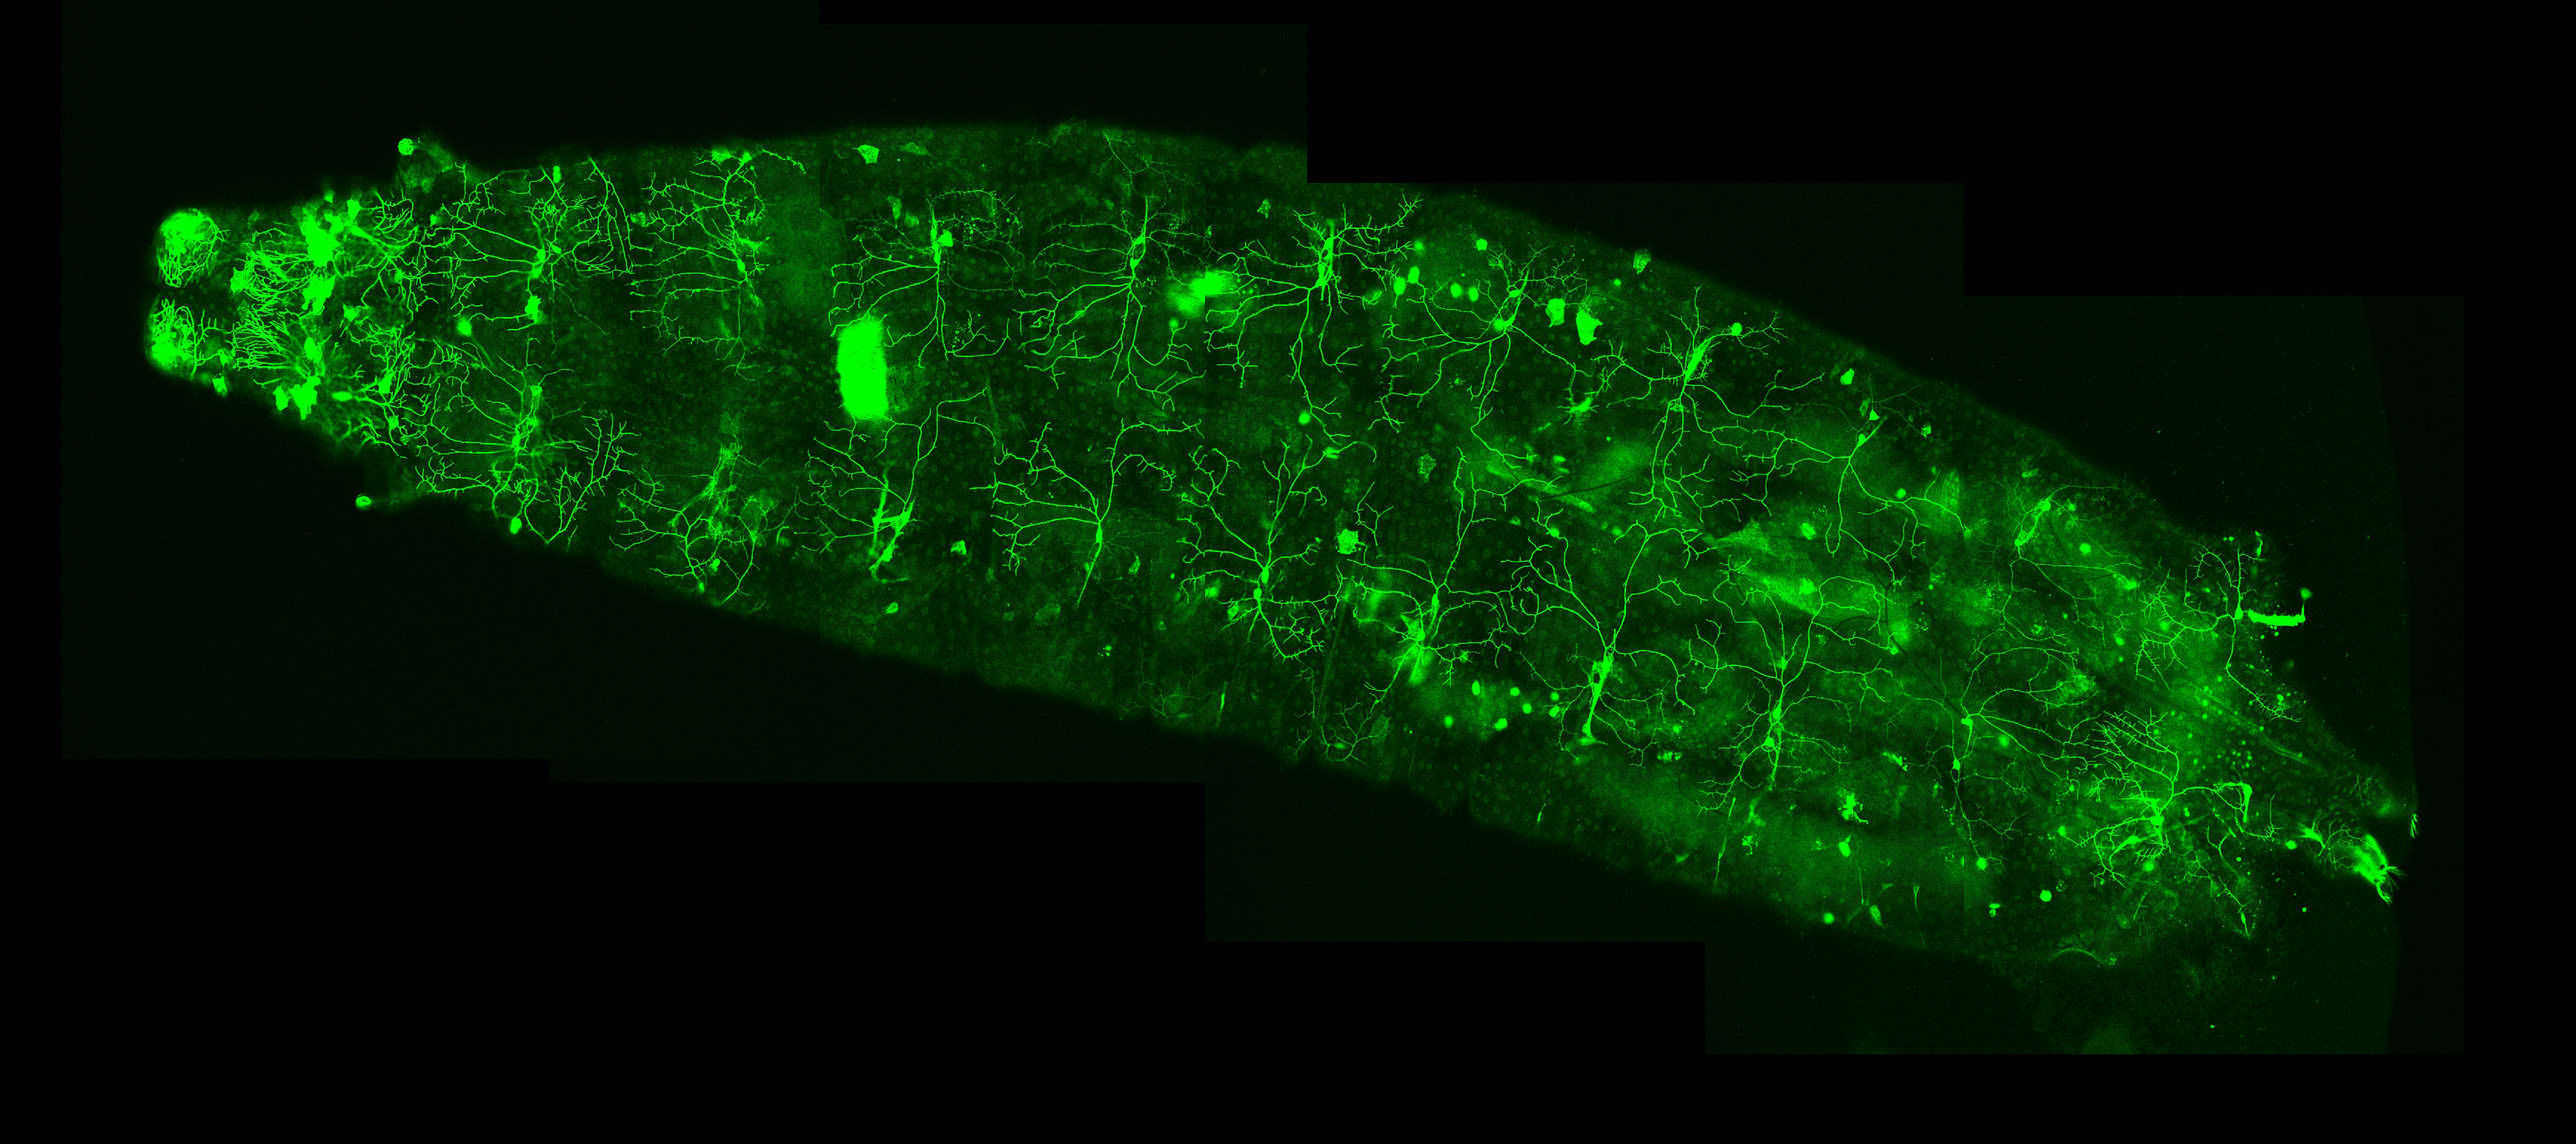 Drosophila larvea Class III neurons labeled with GFP.

The dendrites of five class III dendritic arborization neurons tile 70–80% of each abdominal hemisegment. Larva can use these neurons to detect gentle touch on most of its body for navigation and defense. (Yan Z, et al. Drosophila NOMPC is a mechanotransduction channel subunit for gentle-touch sensation. Nature. 2013. 493(7431): 221-5.)